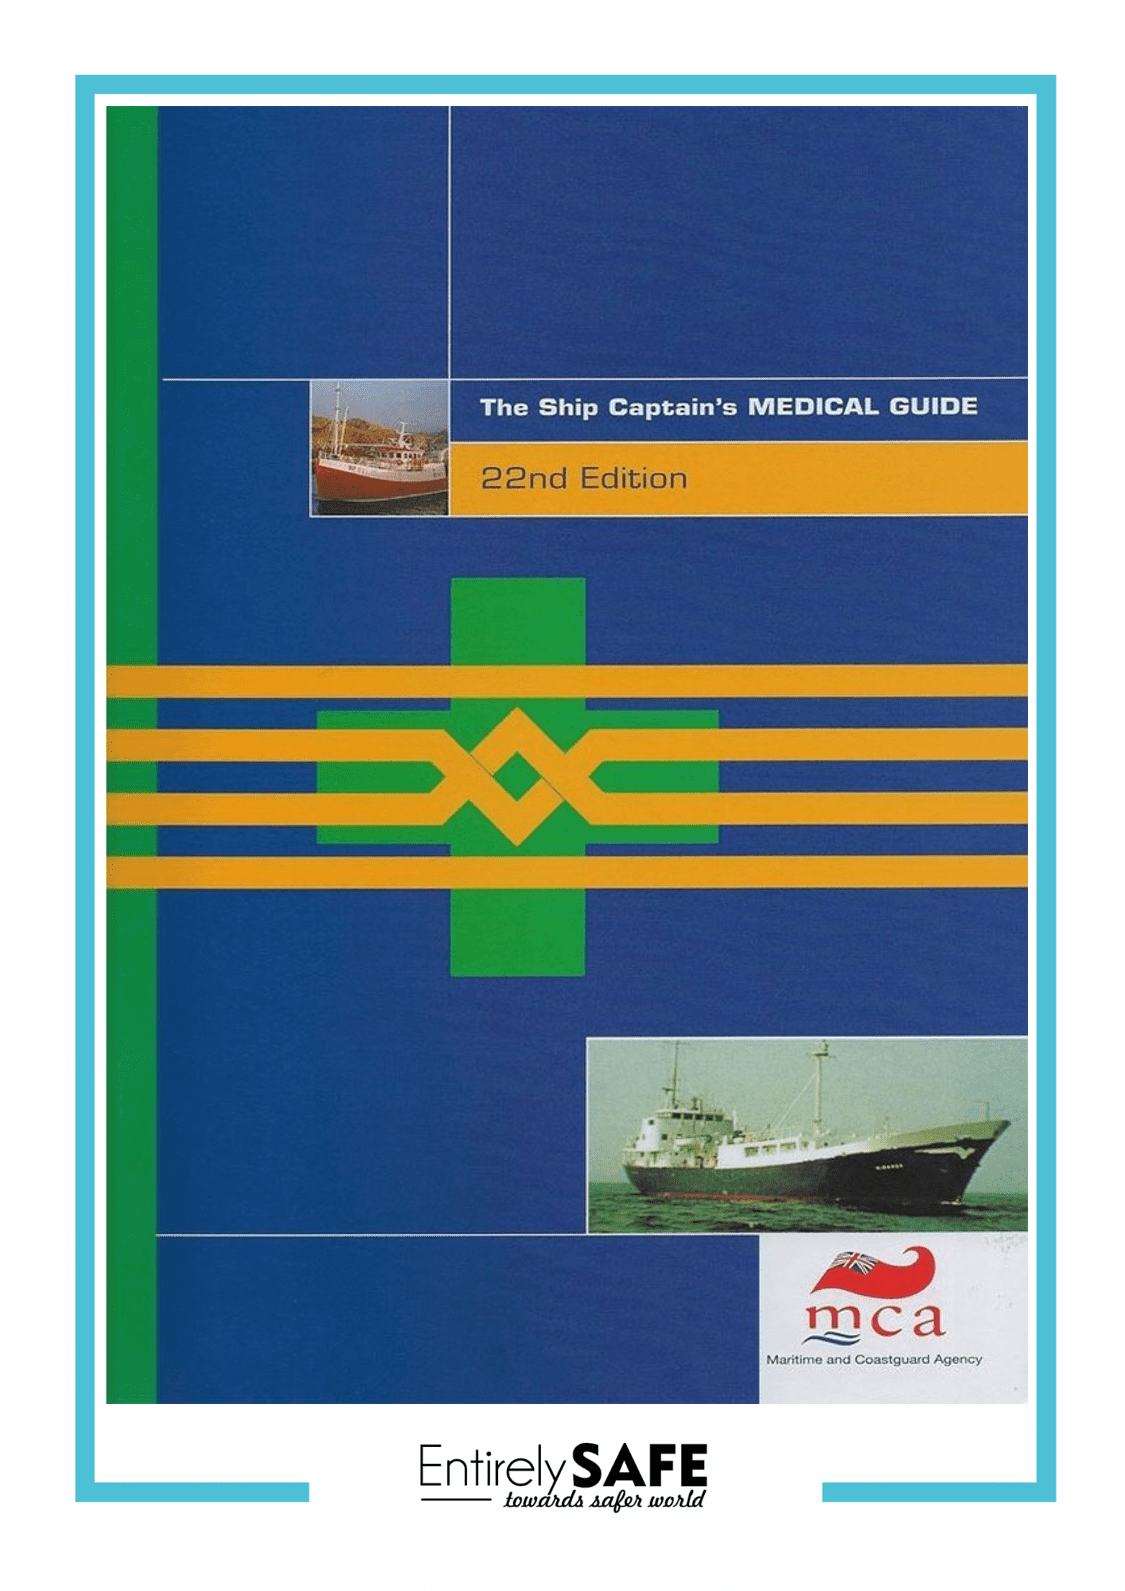 113-Ship-captains-medical-guide-featured (1)